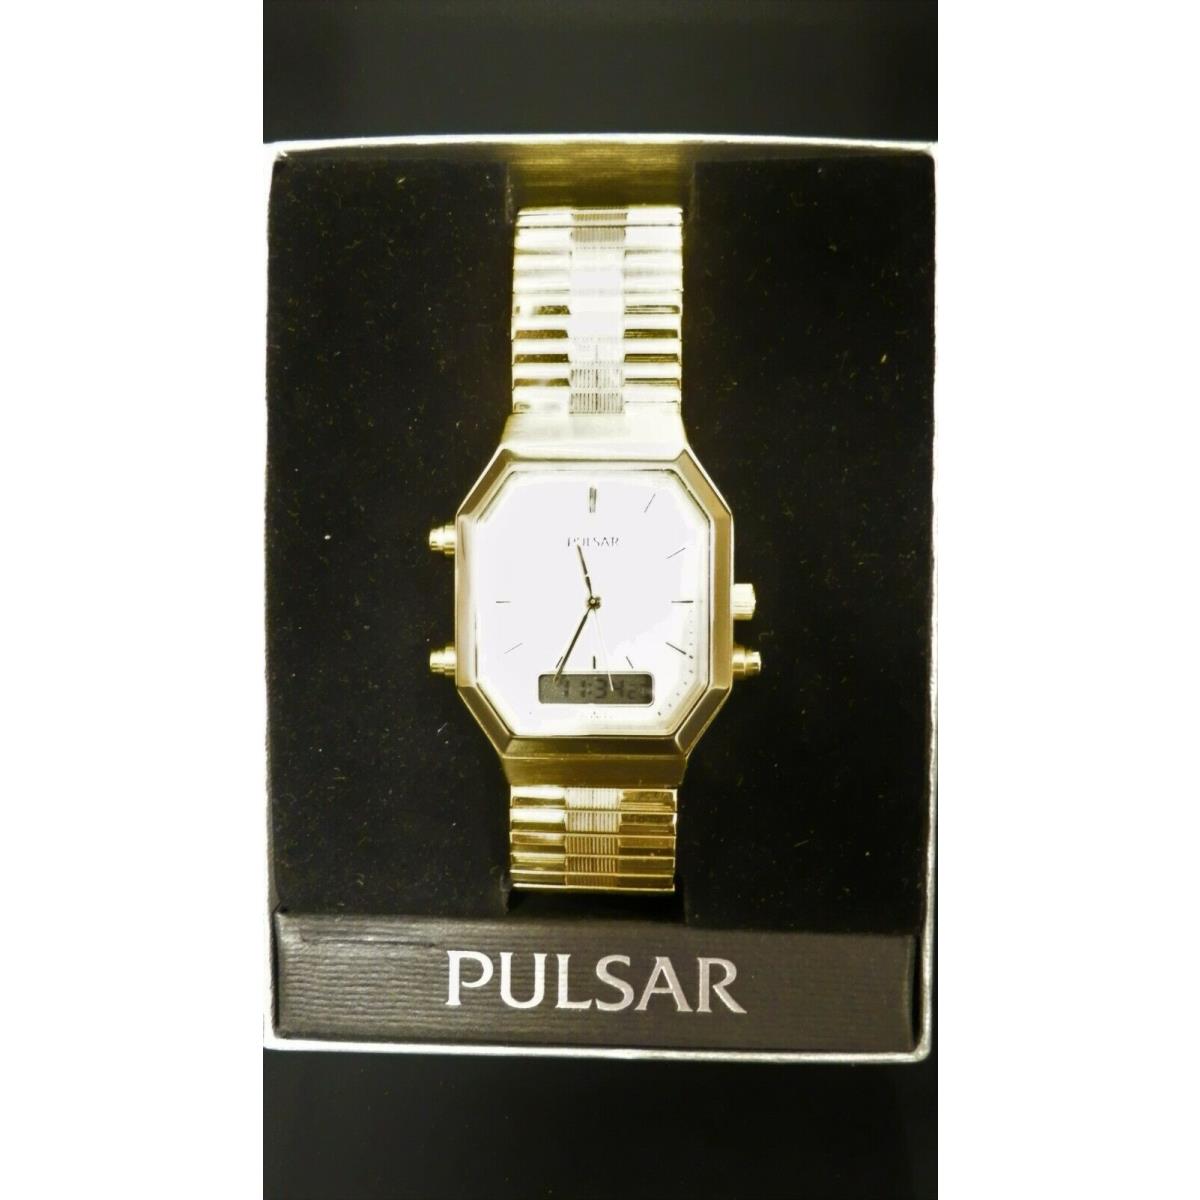 Pulsar Watch PBK012 Water Resistant Japanese Movement Mineral Crystal